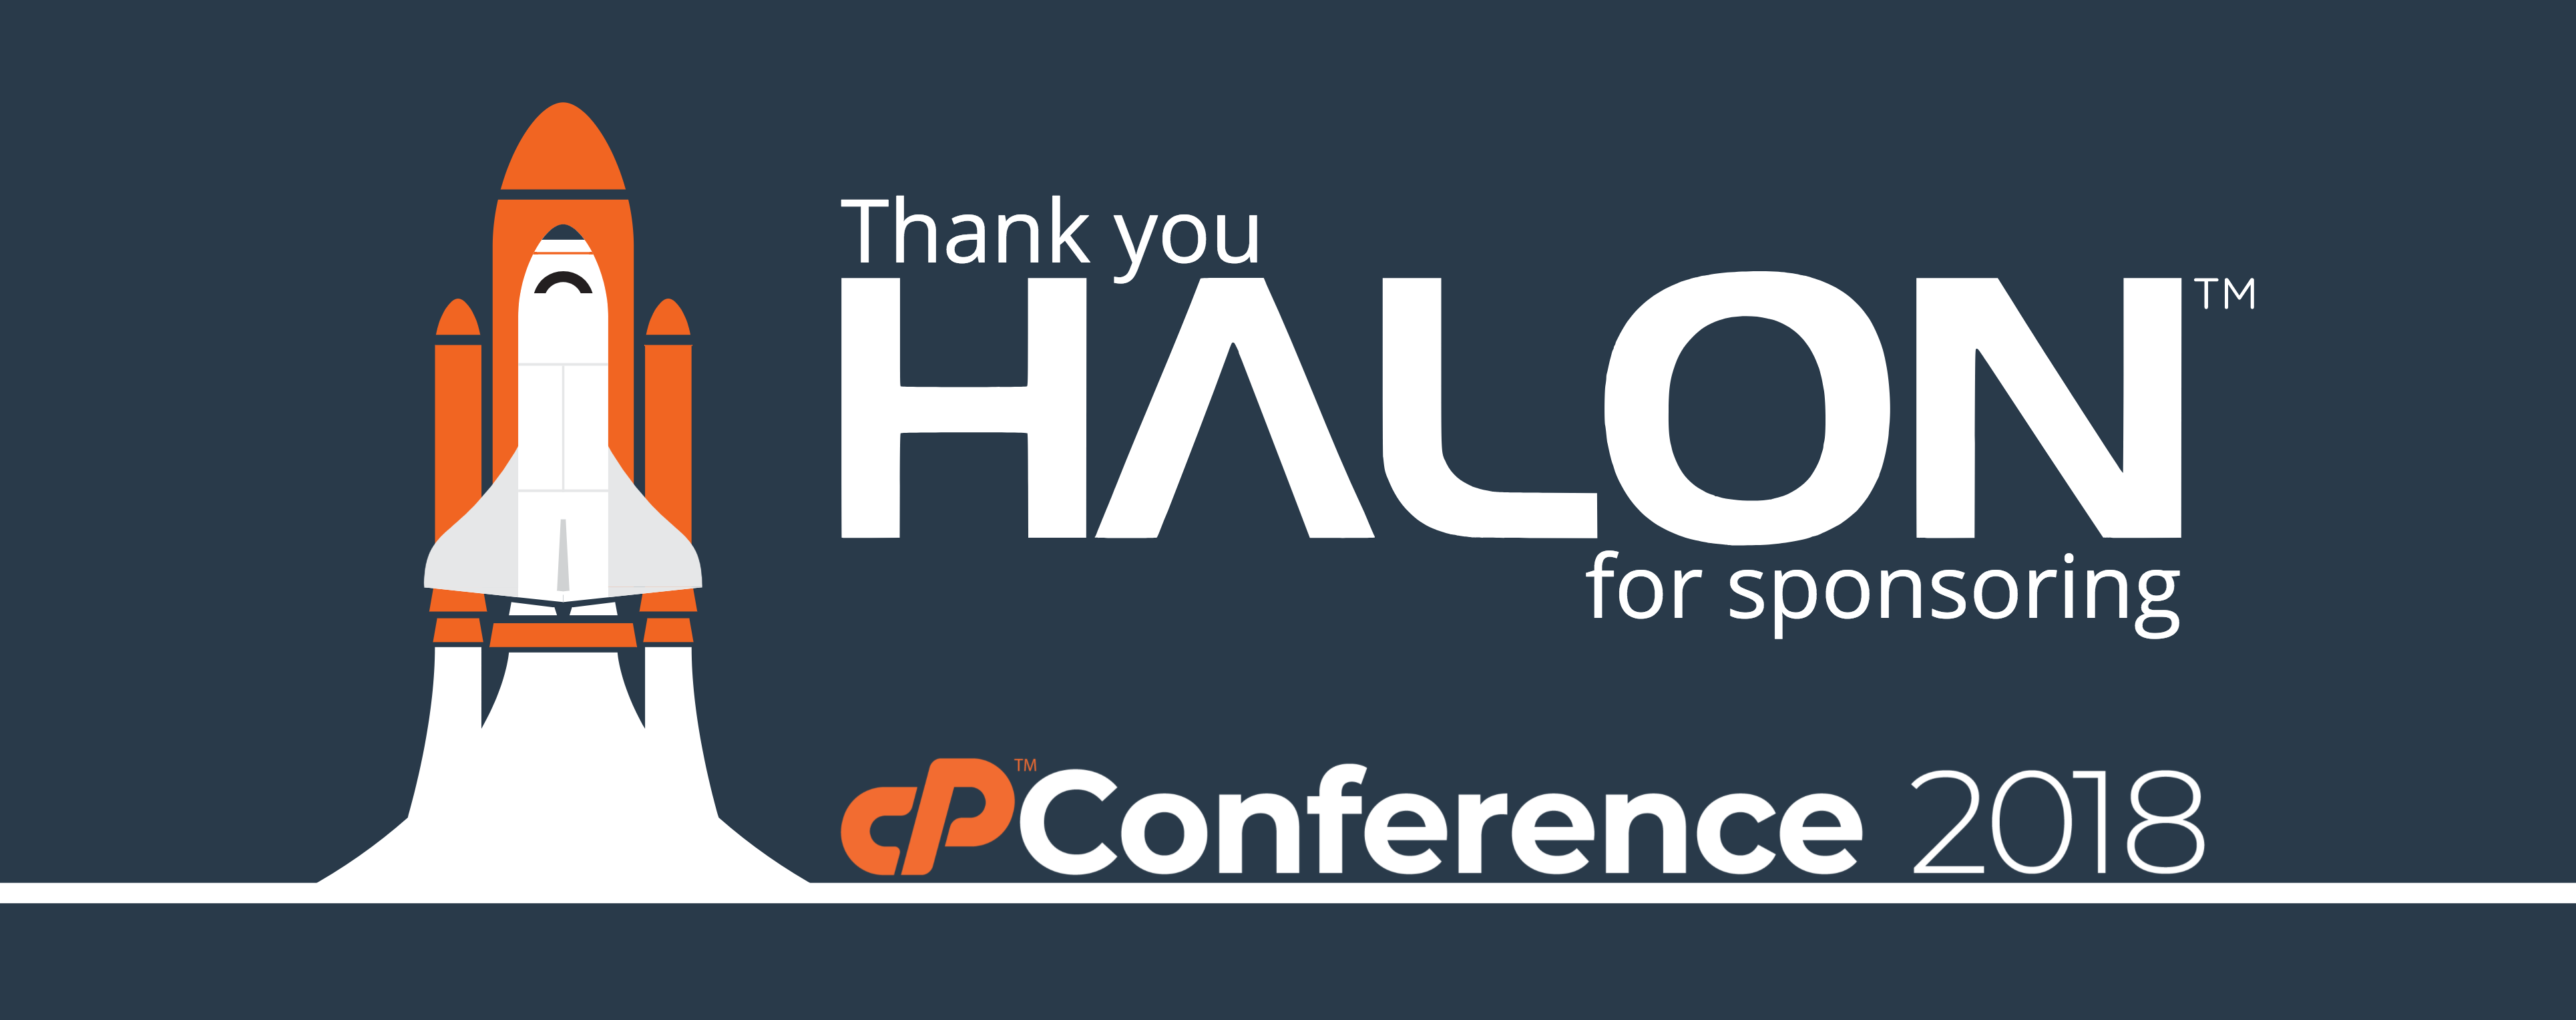 Check out Halon, a new sponsor at this year’s cPanel Conference!